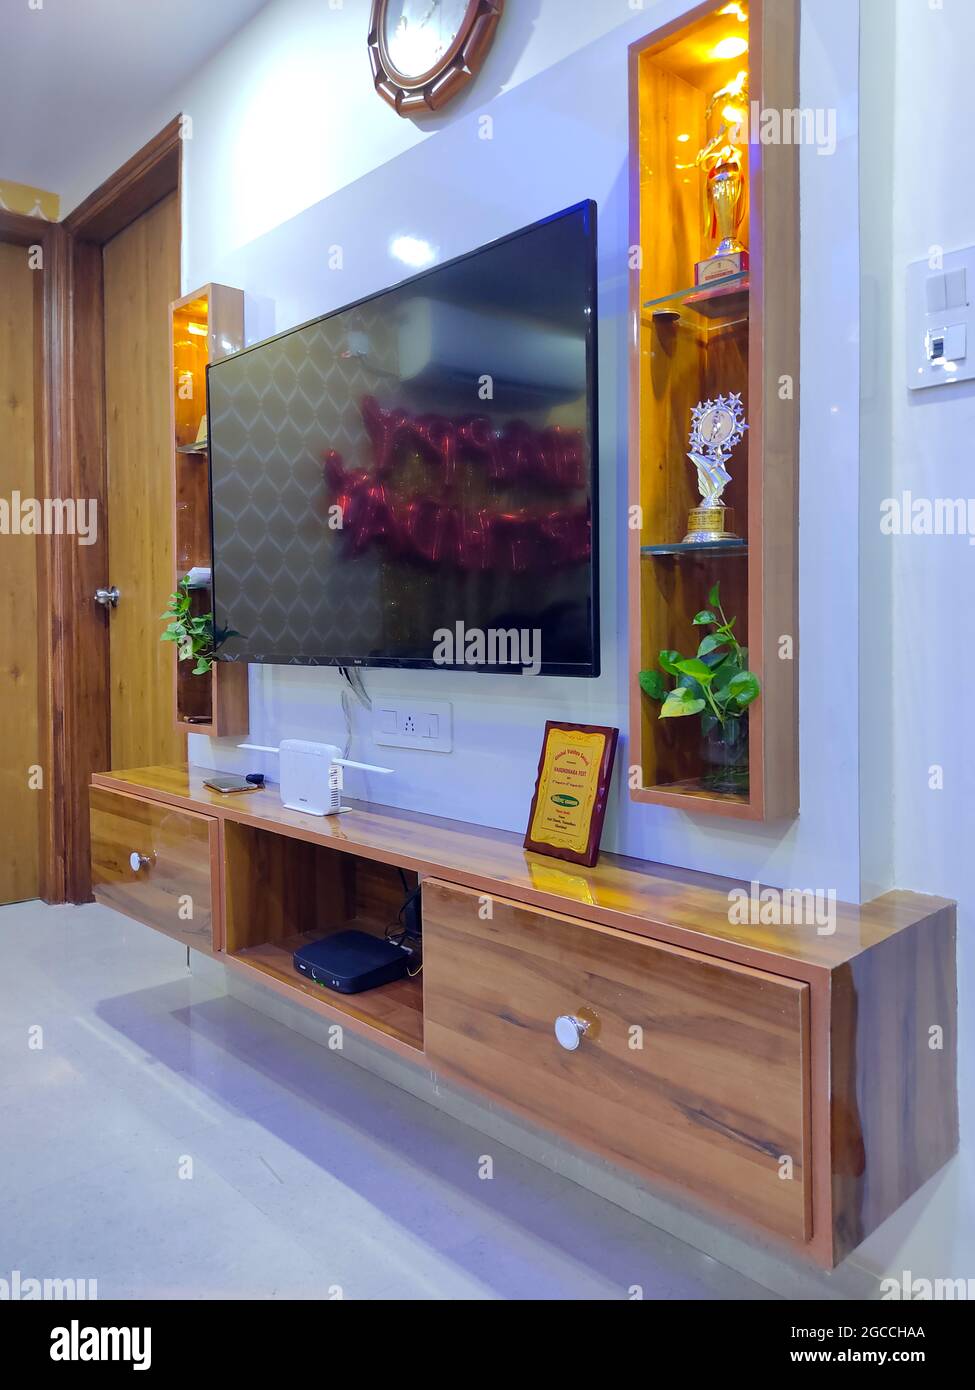 Wall Hanging Television Showcase Cabinet with Wooden Panel ...